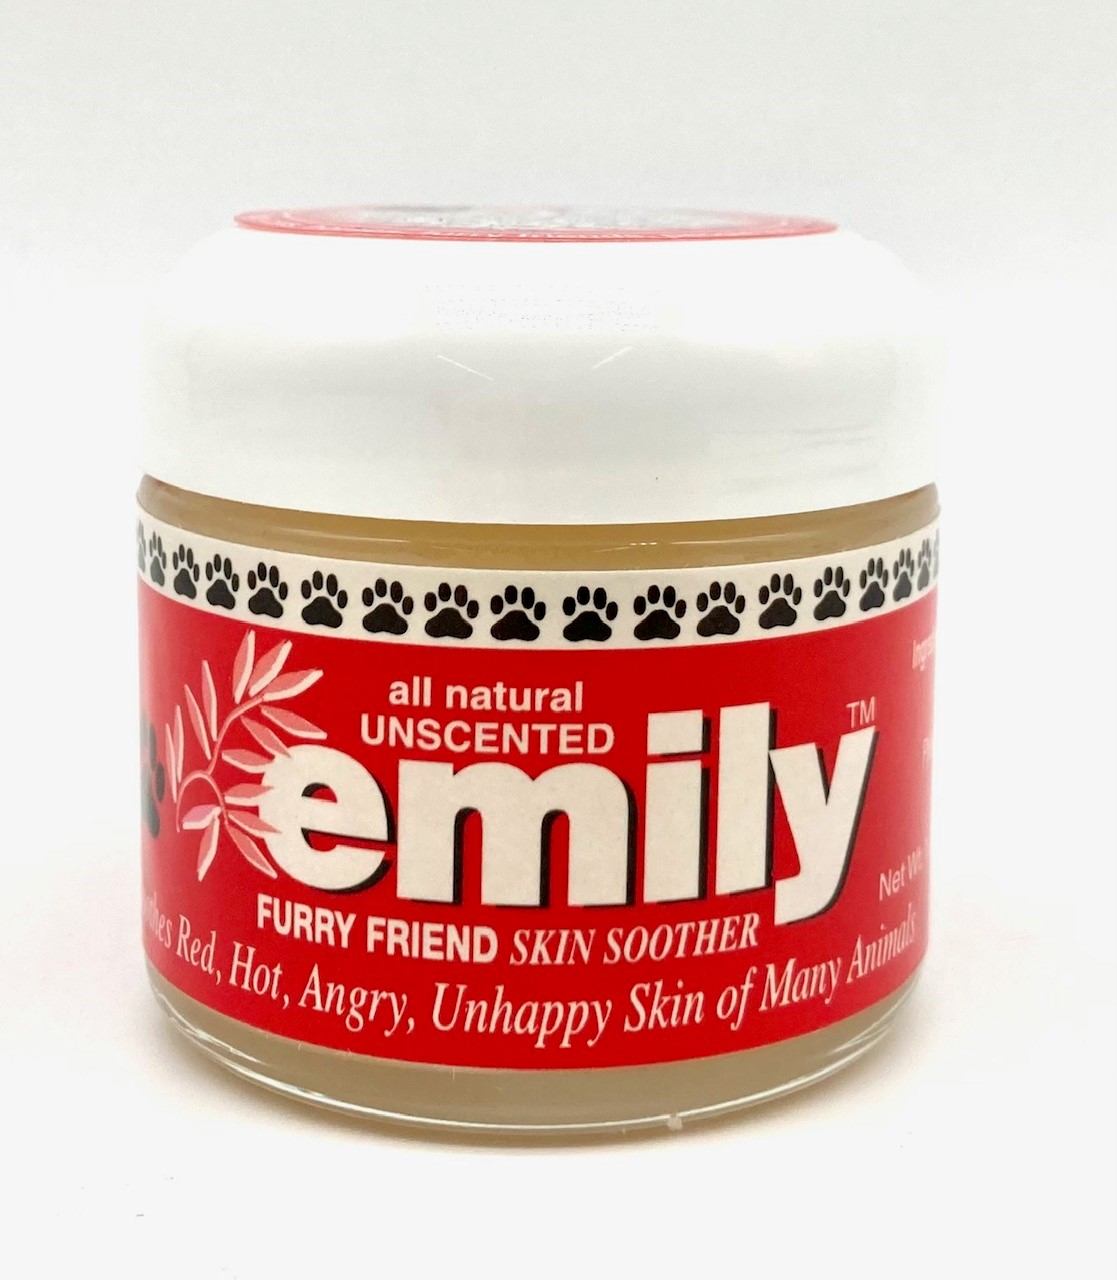 Furry Friend Skin Soother